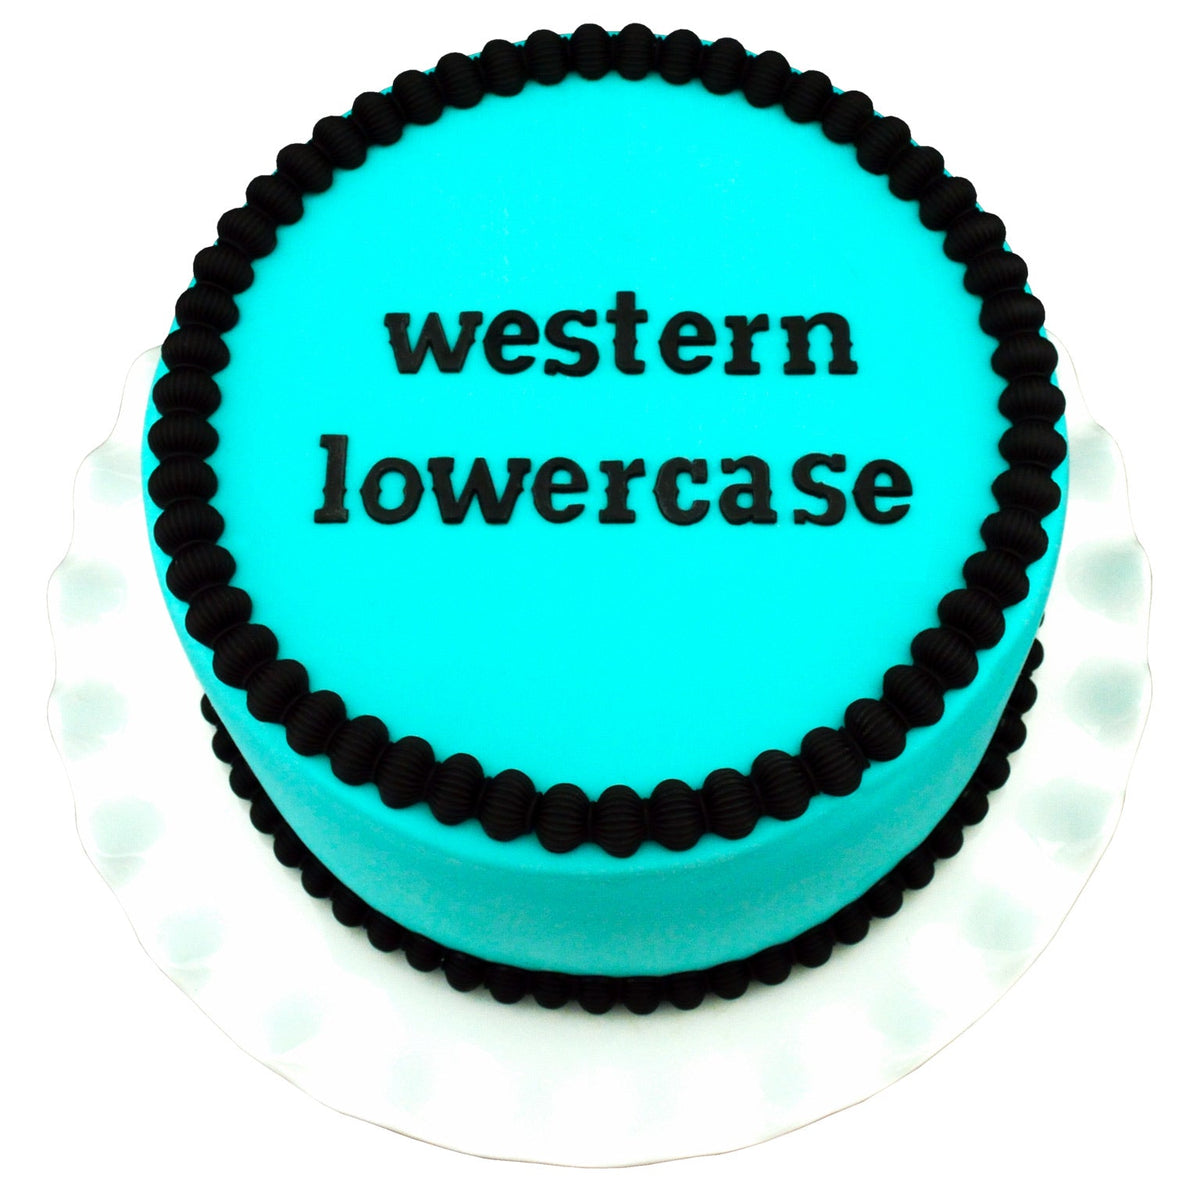 Decorated Cake using Western Lowercase Flexabet Food Safe Silicone Letter Maker by Marvelous Molds